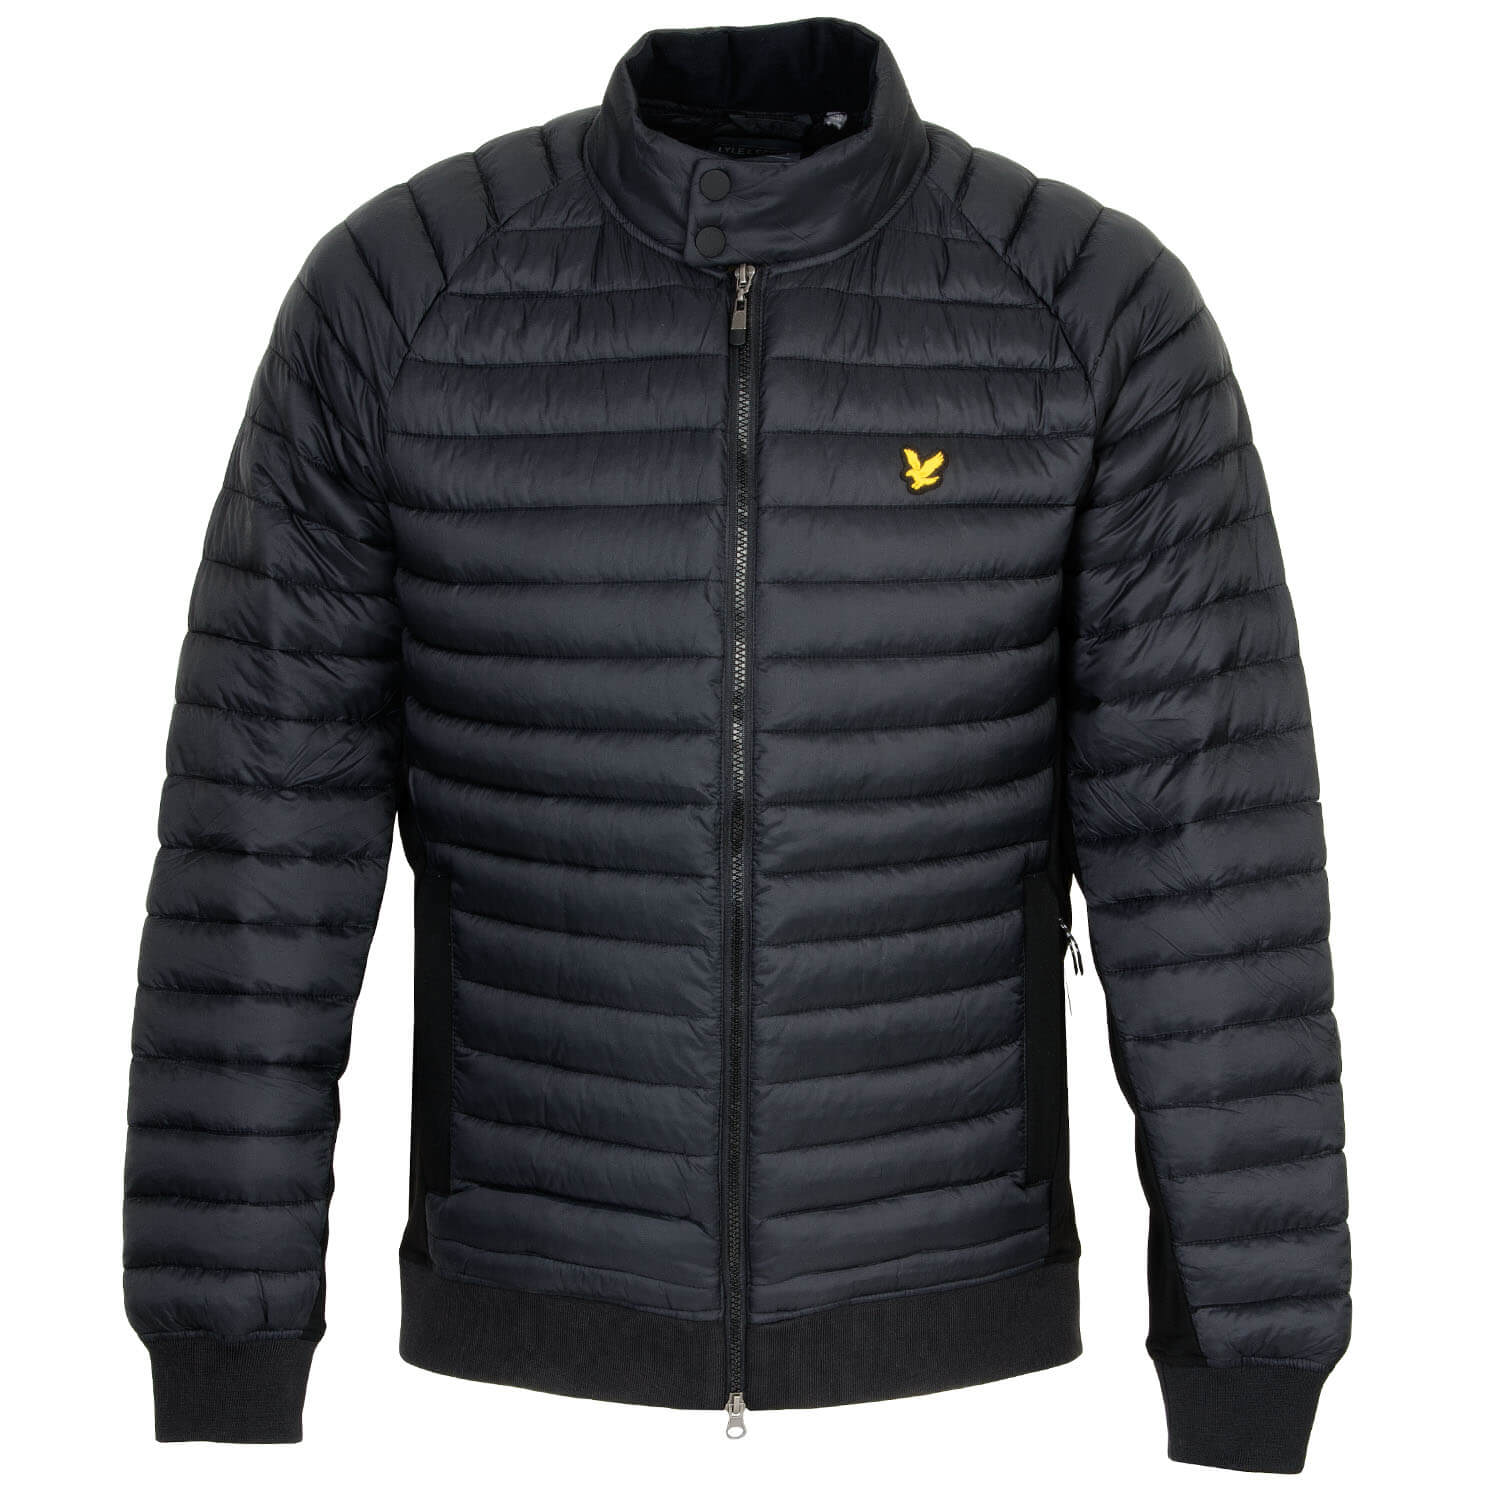 Lyle & Scott Side & Back Stretch Quilted Jacket